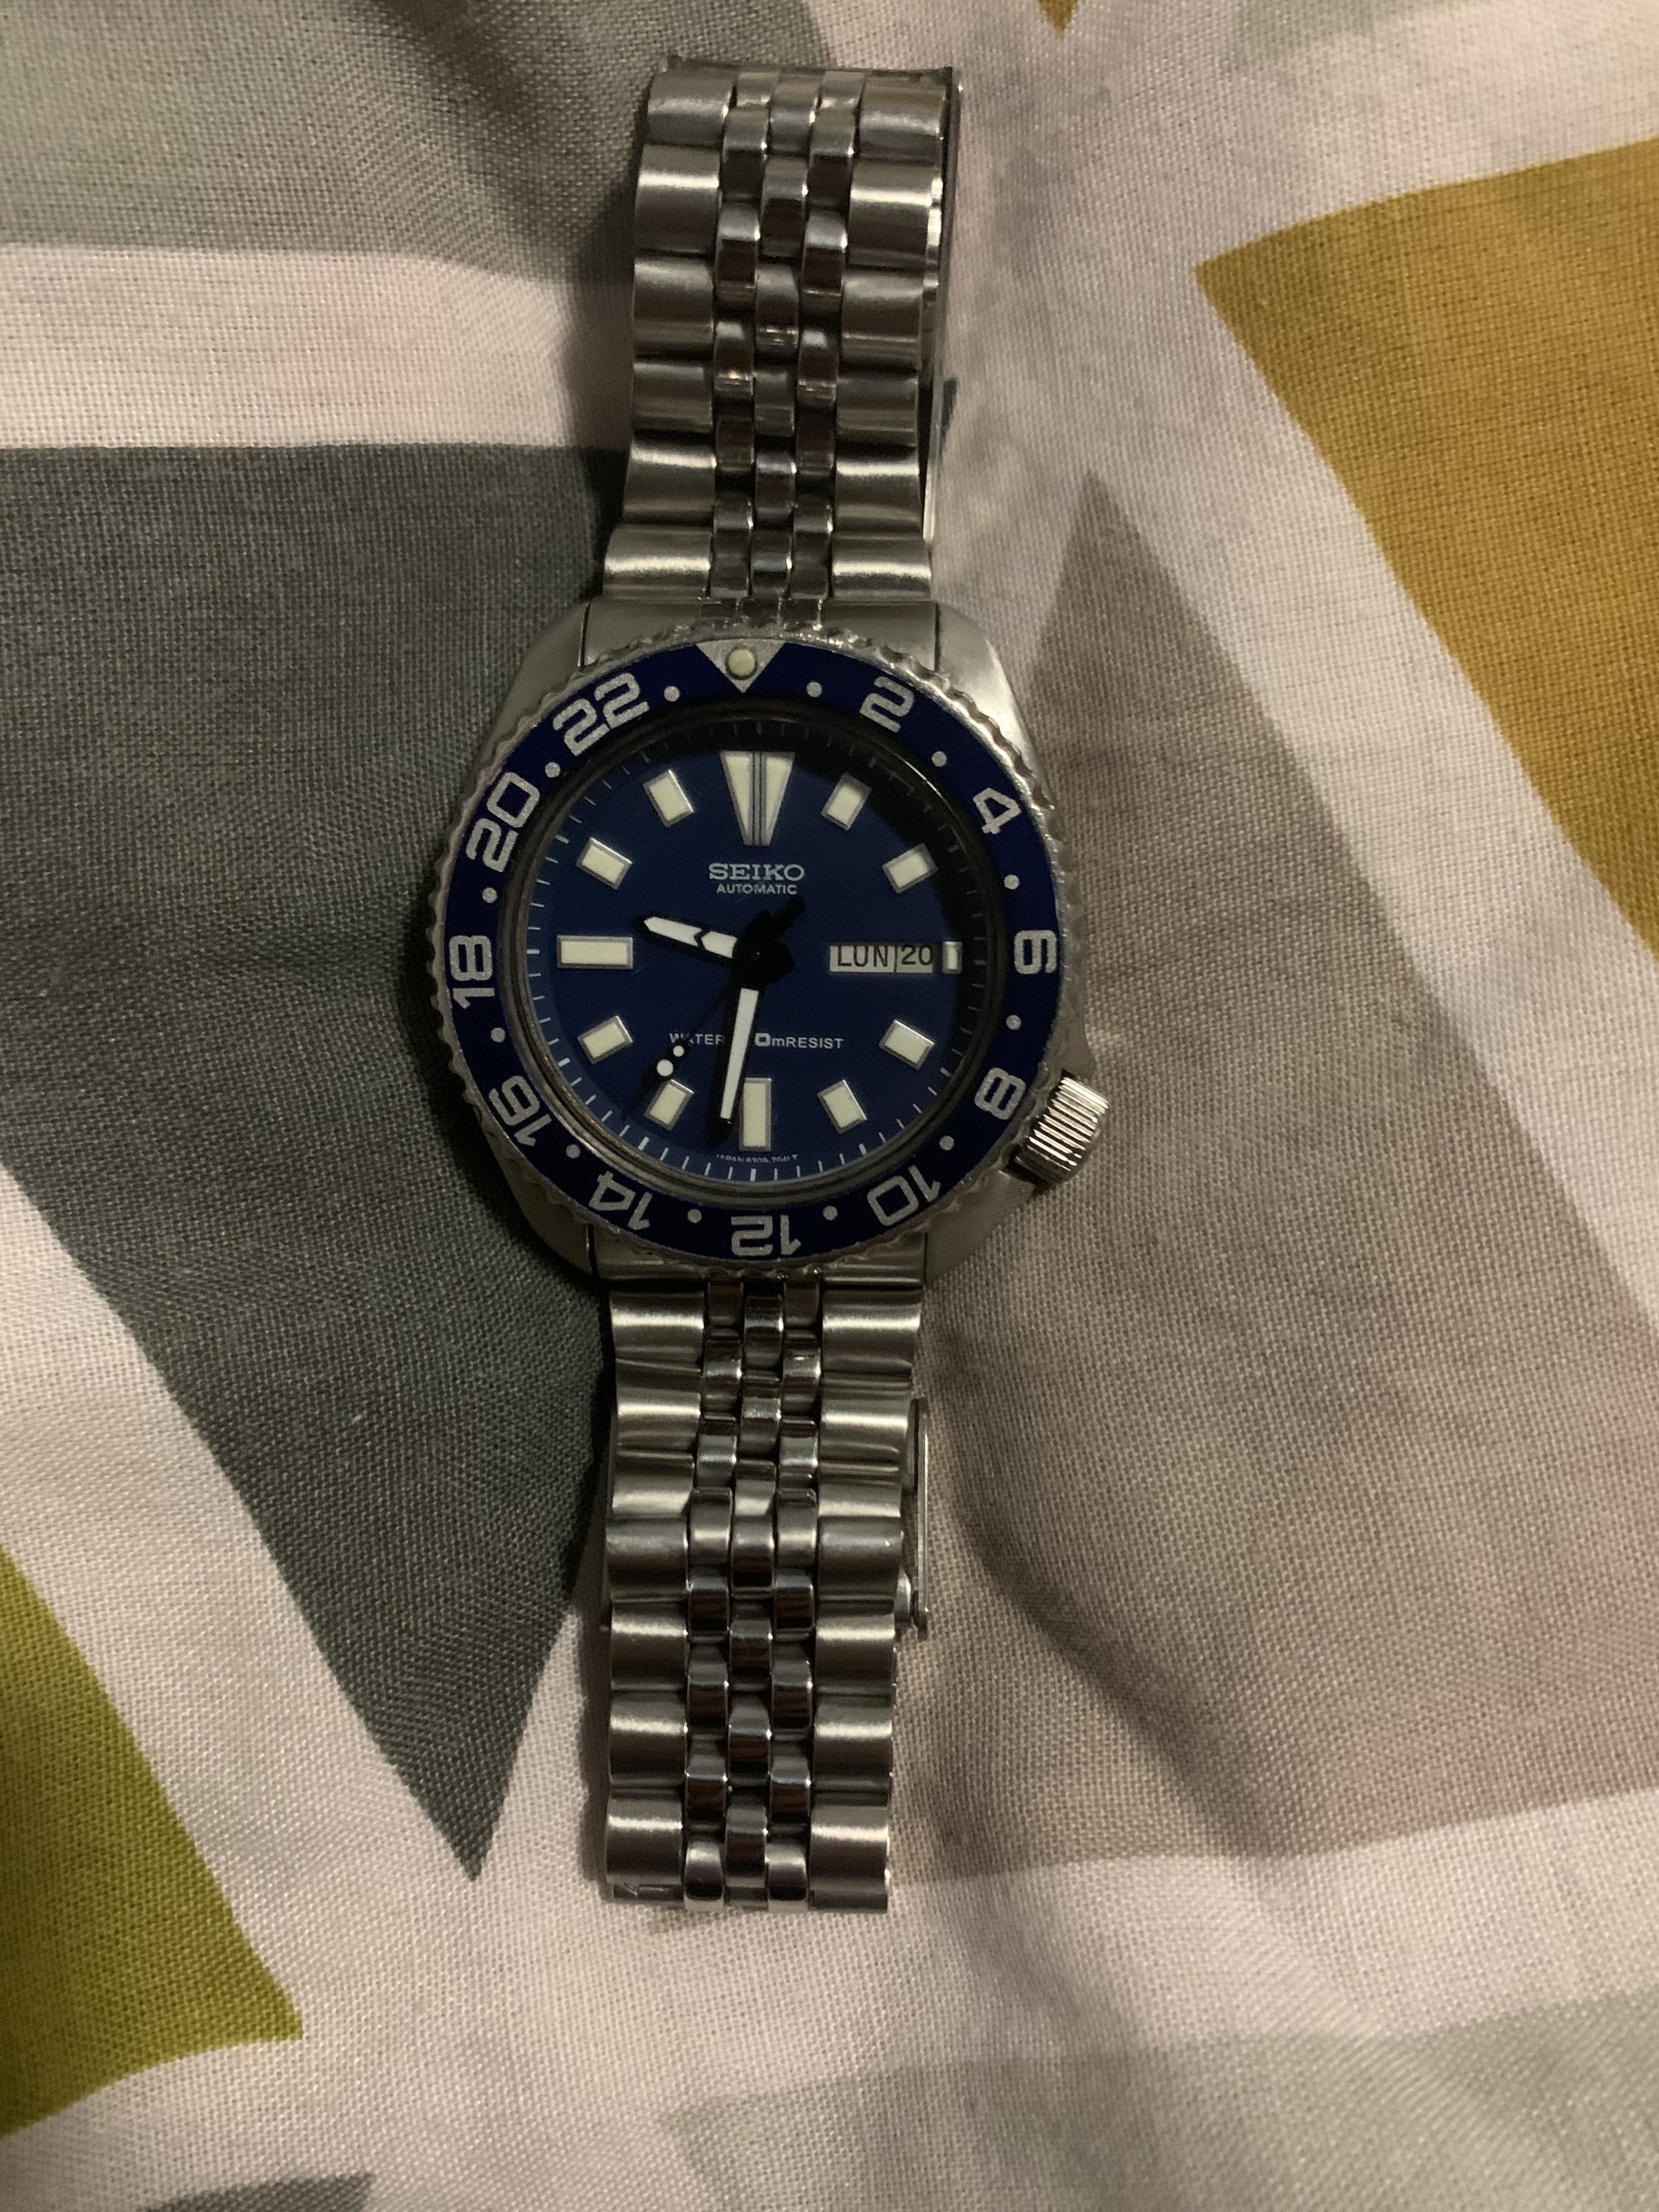 Seiko watch real or fake? Pls help | The Watch Site